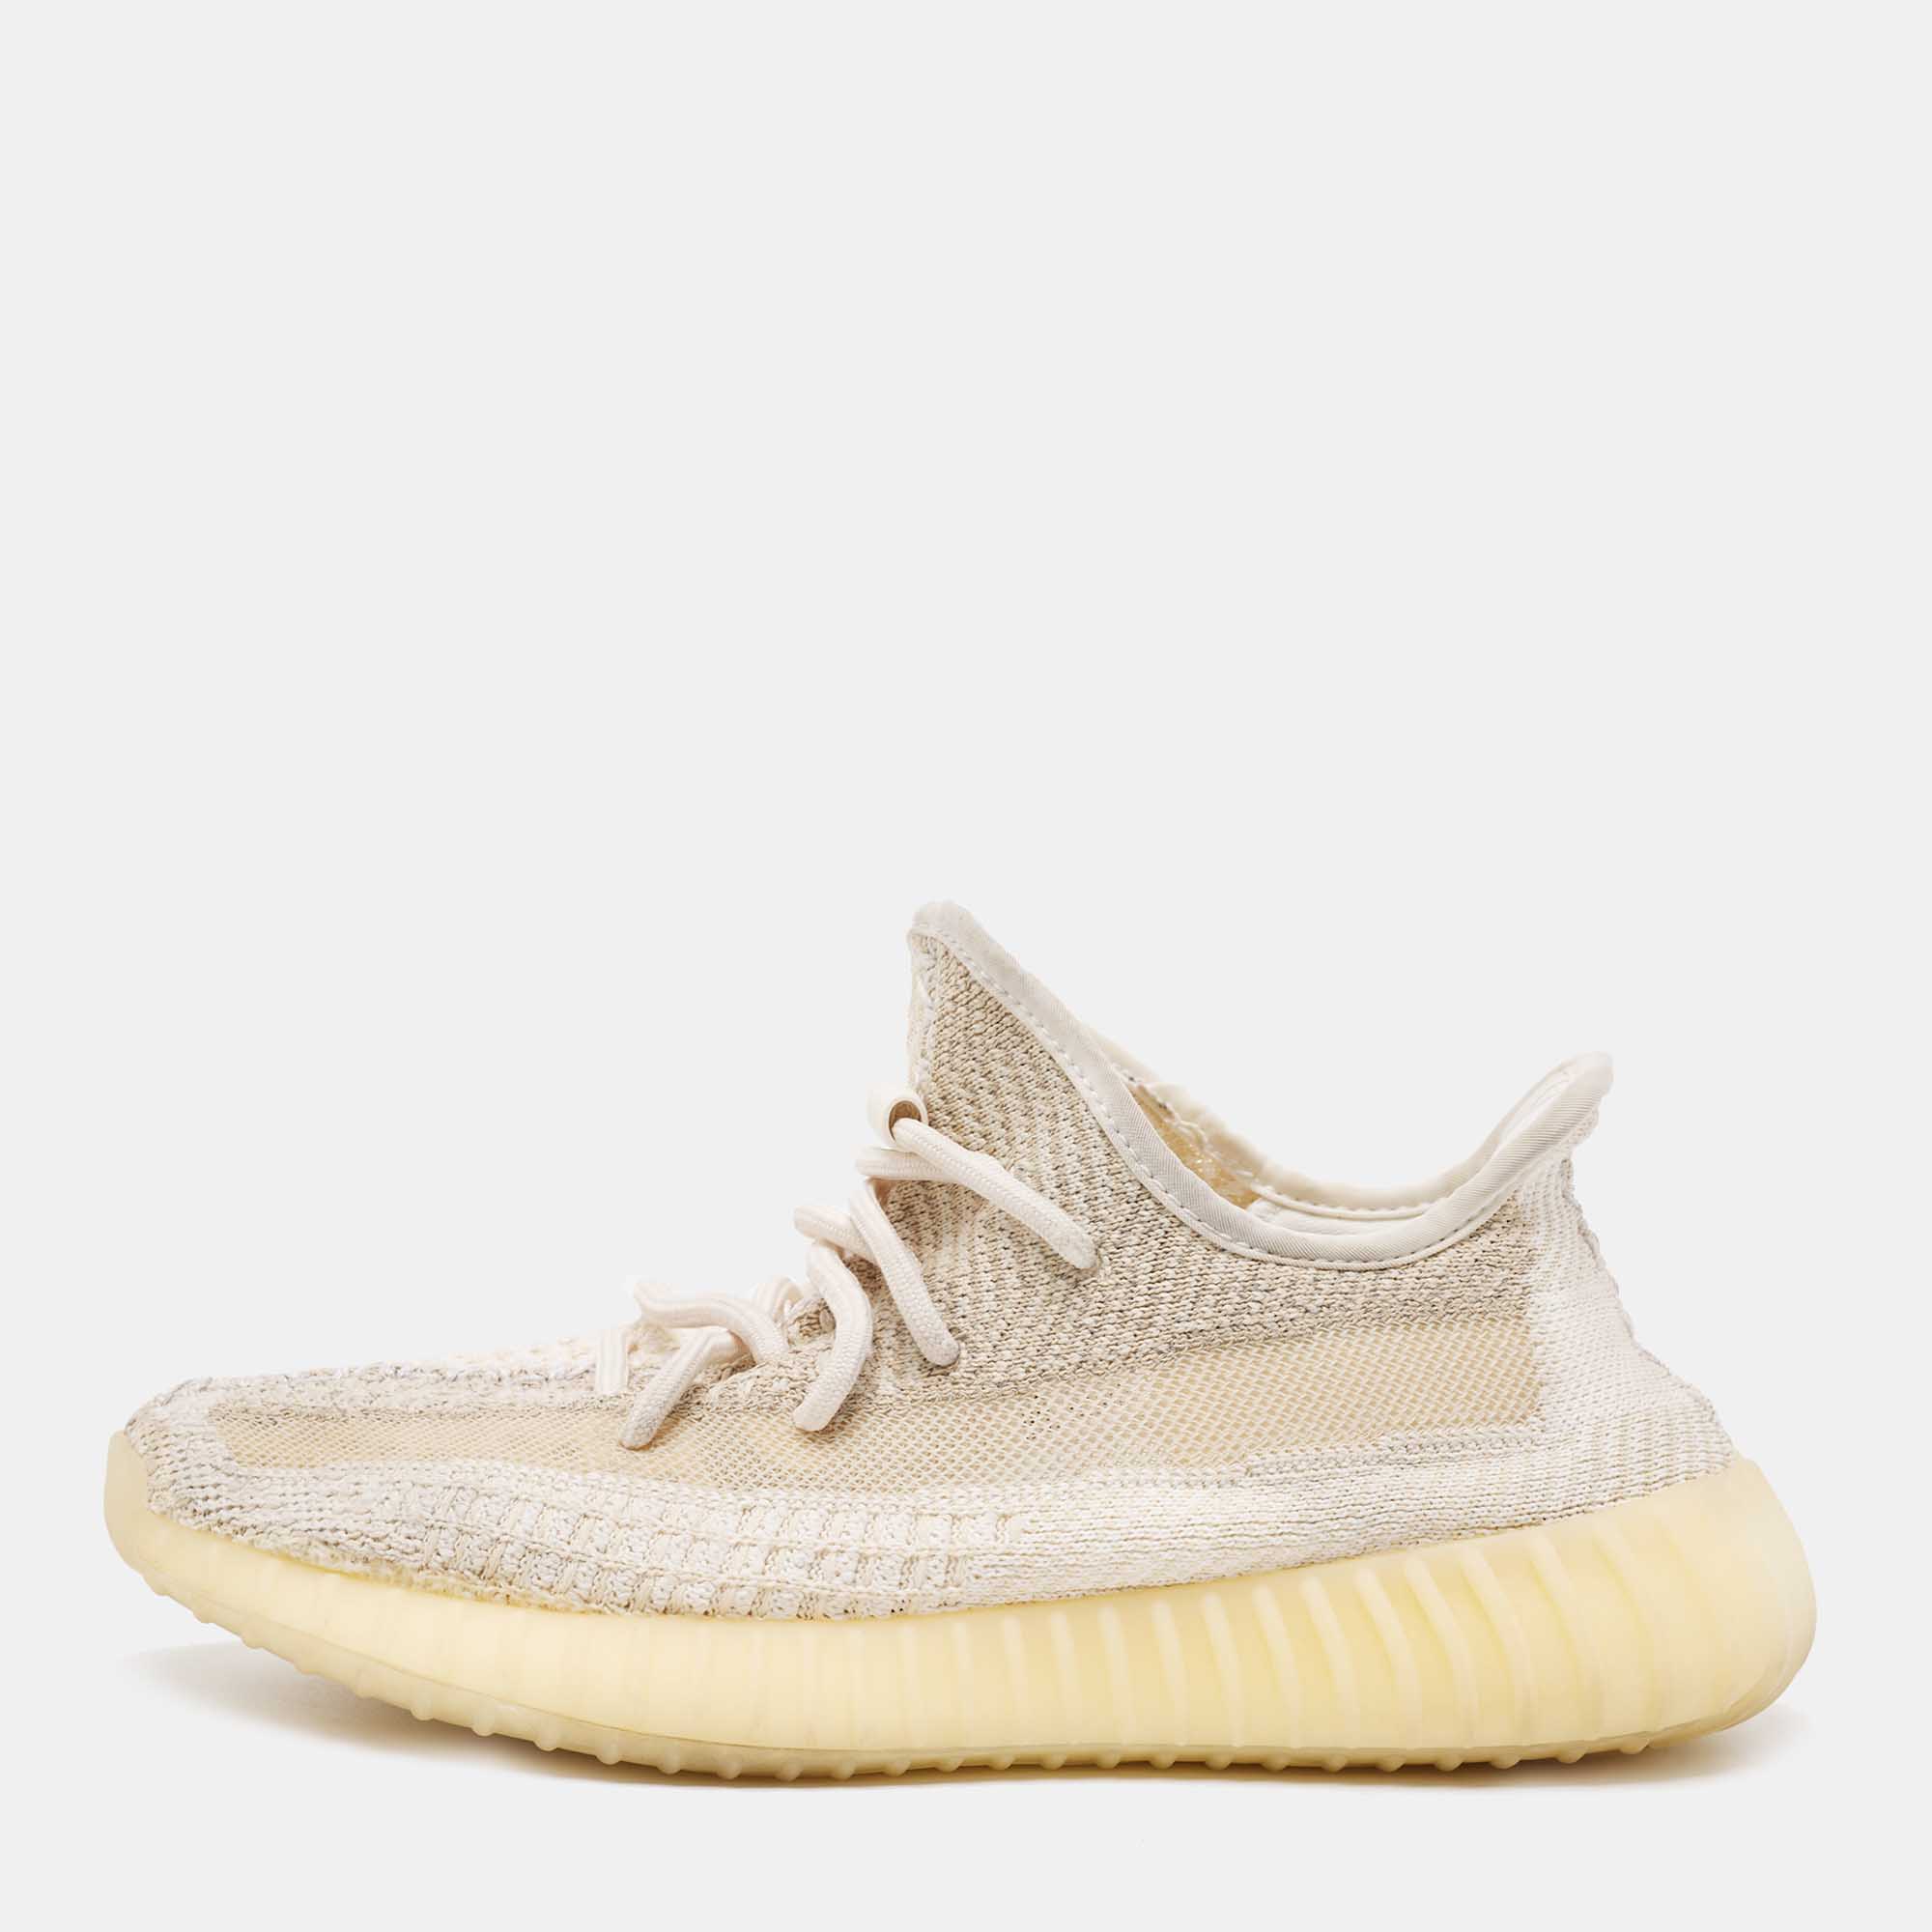 Yeezy Adidas Cream/White Knit Fabric 350 V2 Natural Sneakers 39 1/3